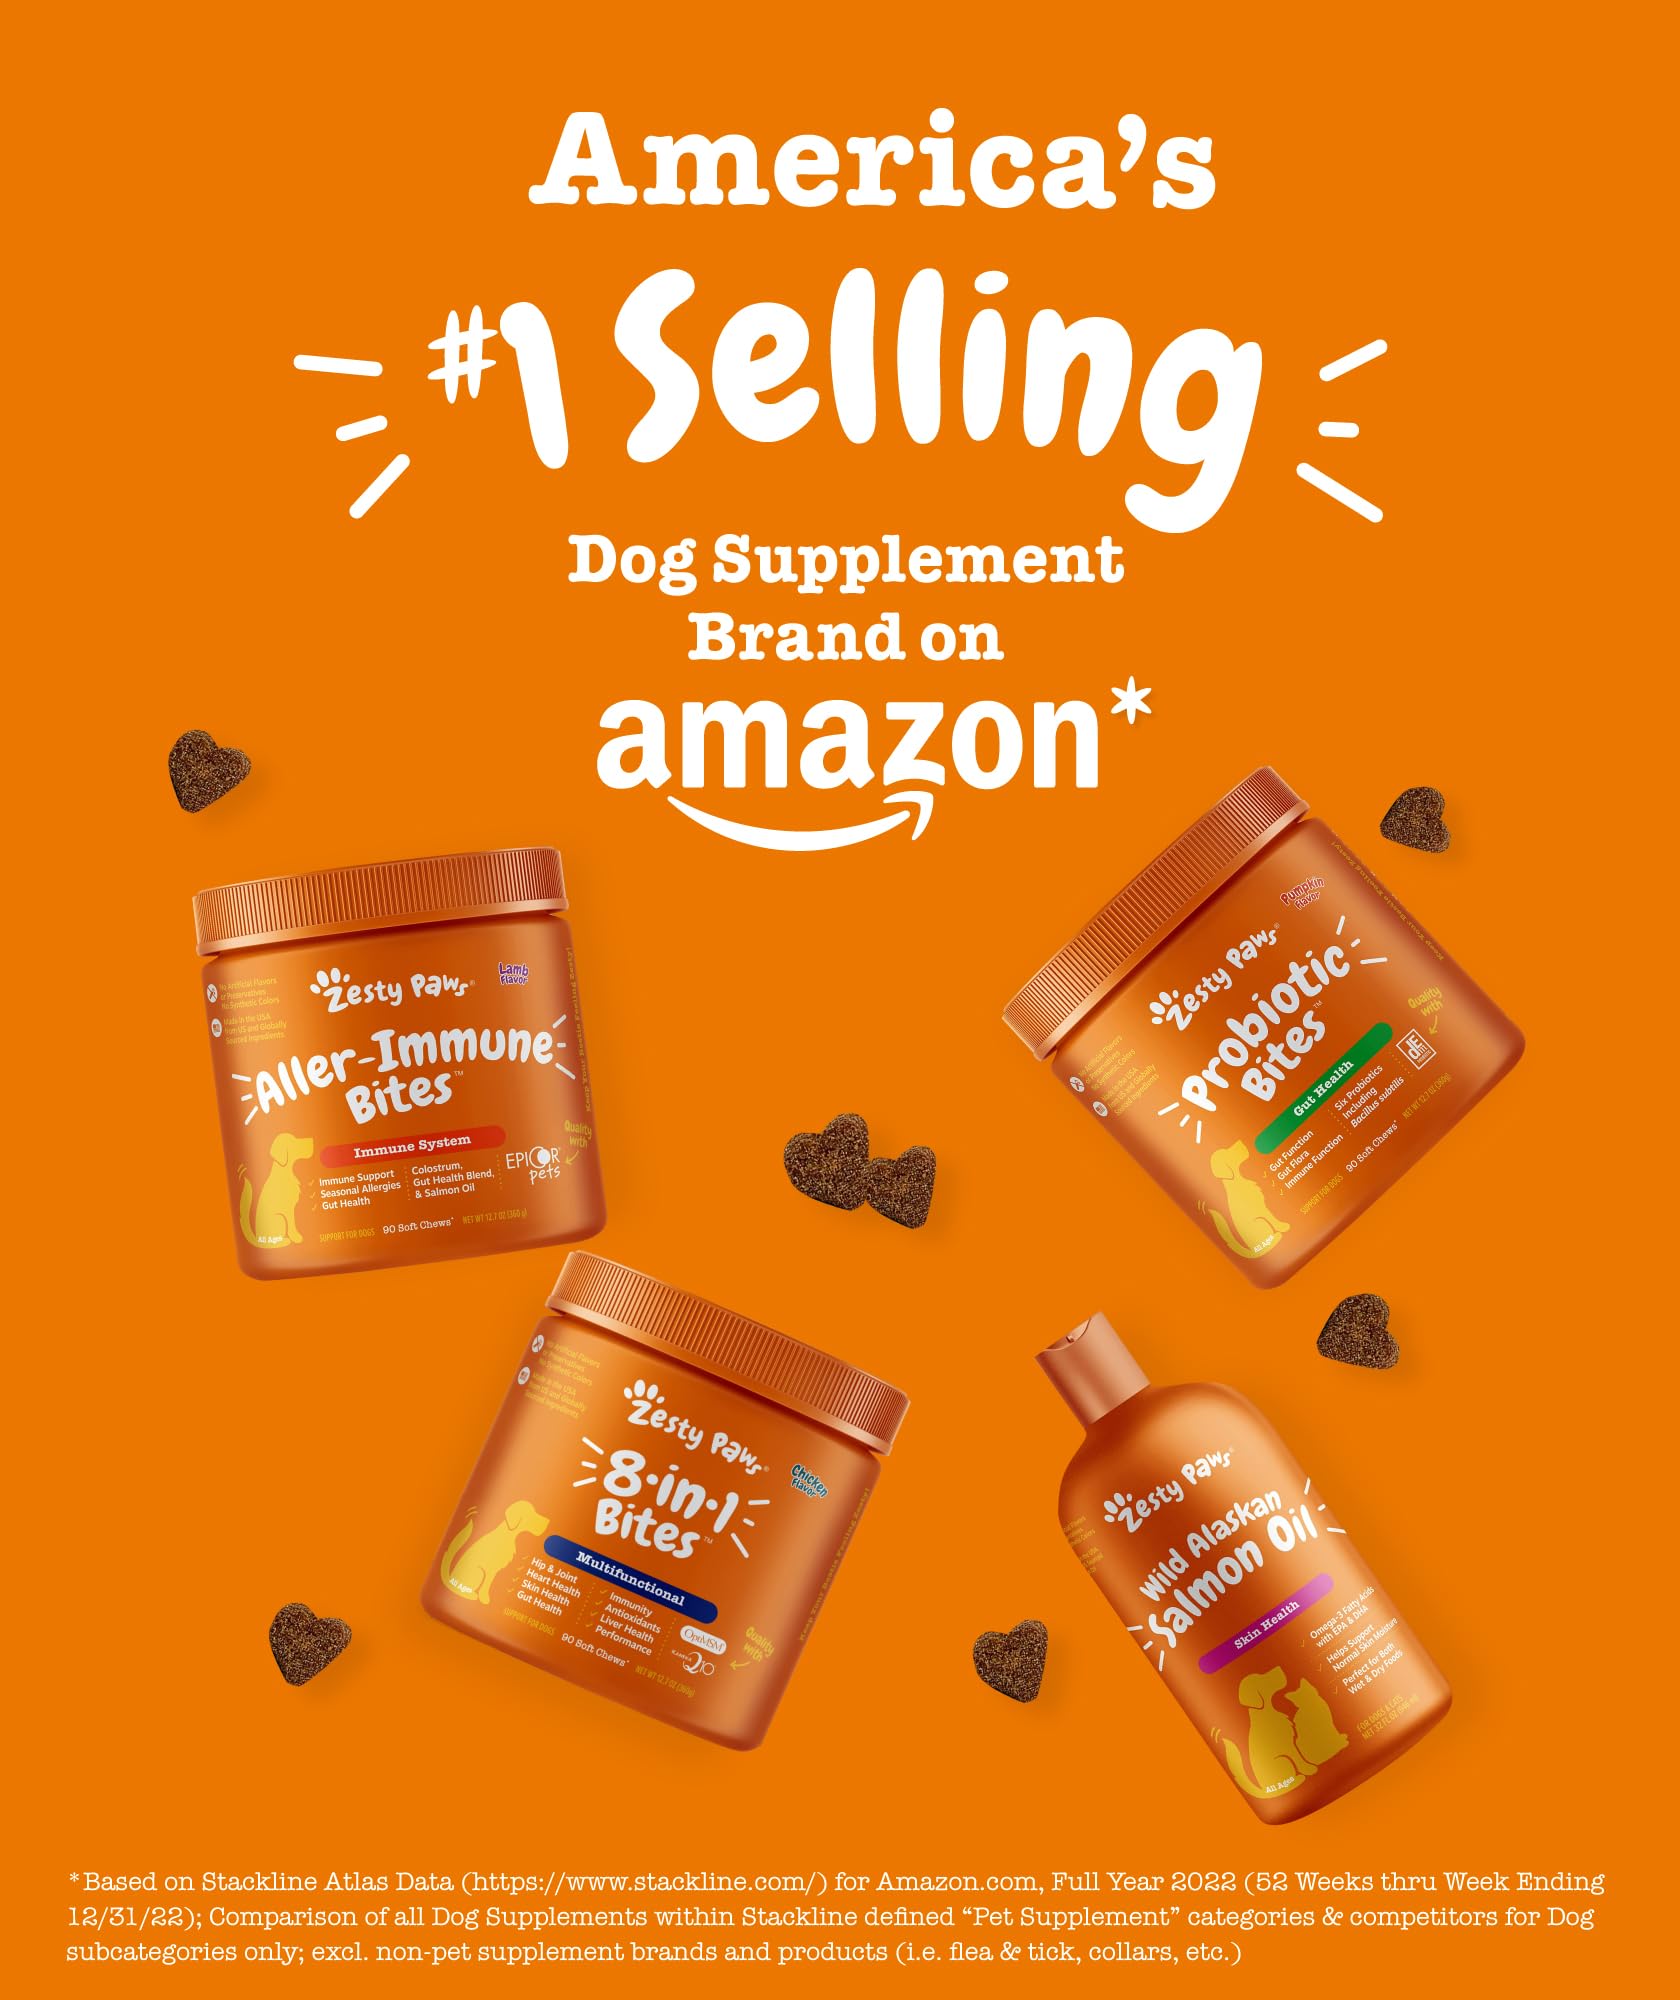 Zesty Paws All-in-1 Everyday Health Training Bites Bacon Flavor Omega-3 Soft and Chewy Dog Treats - 8 Oz  